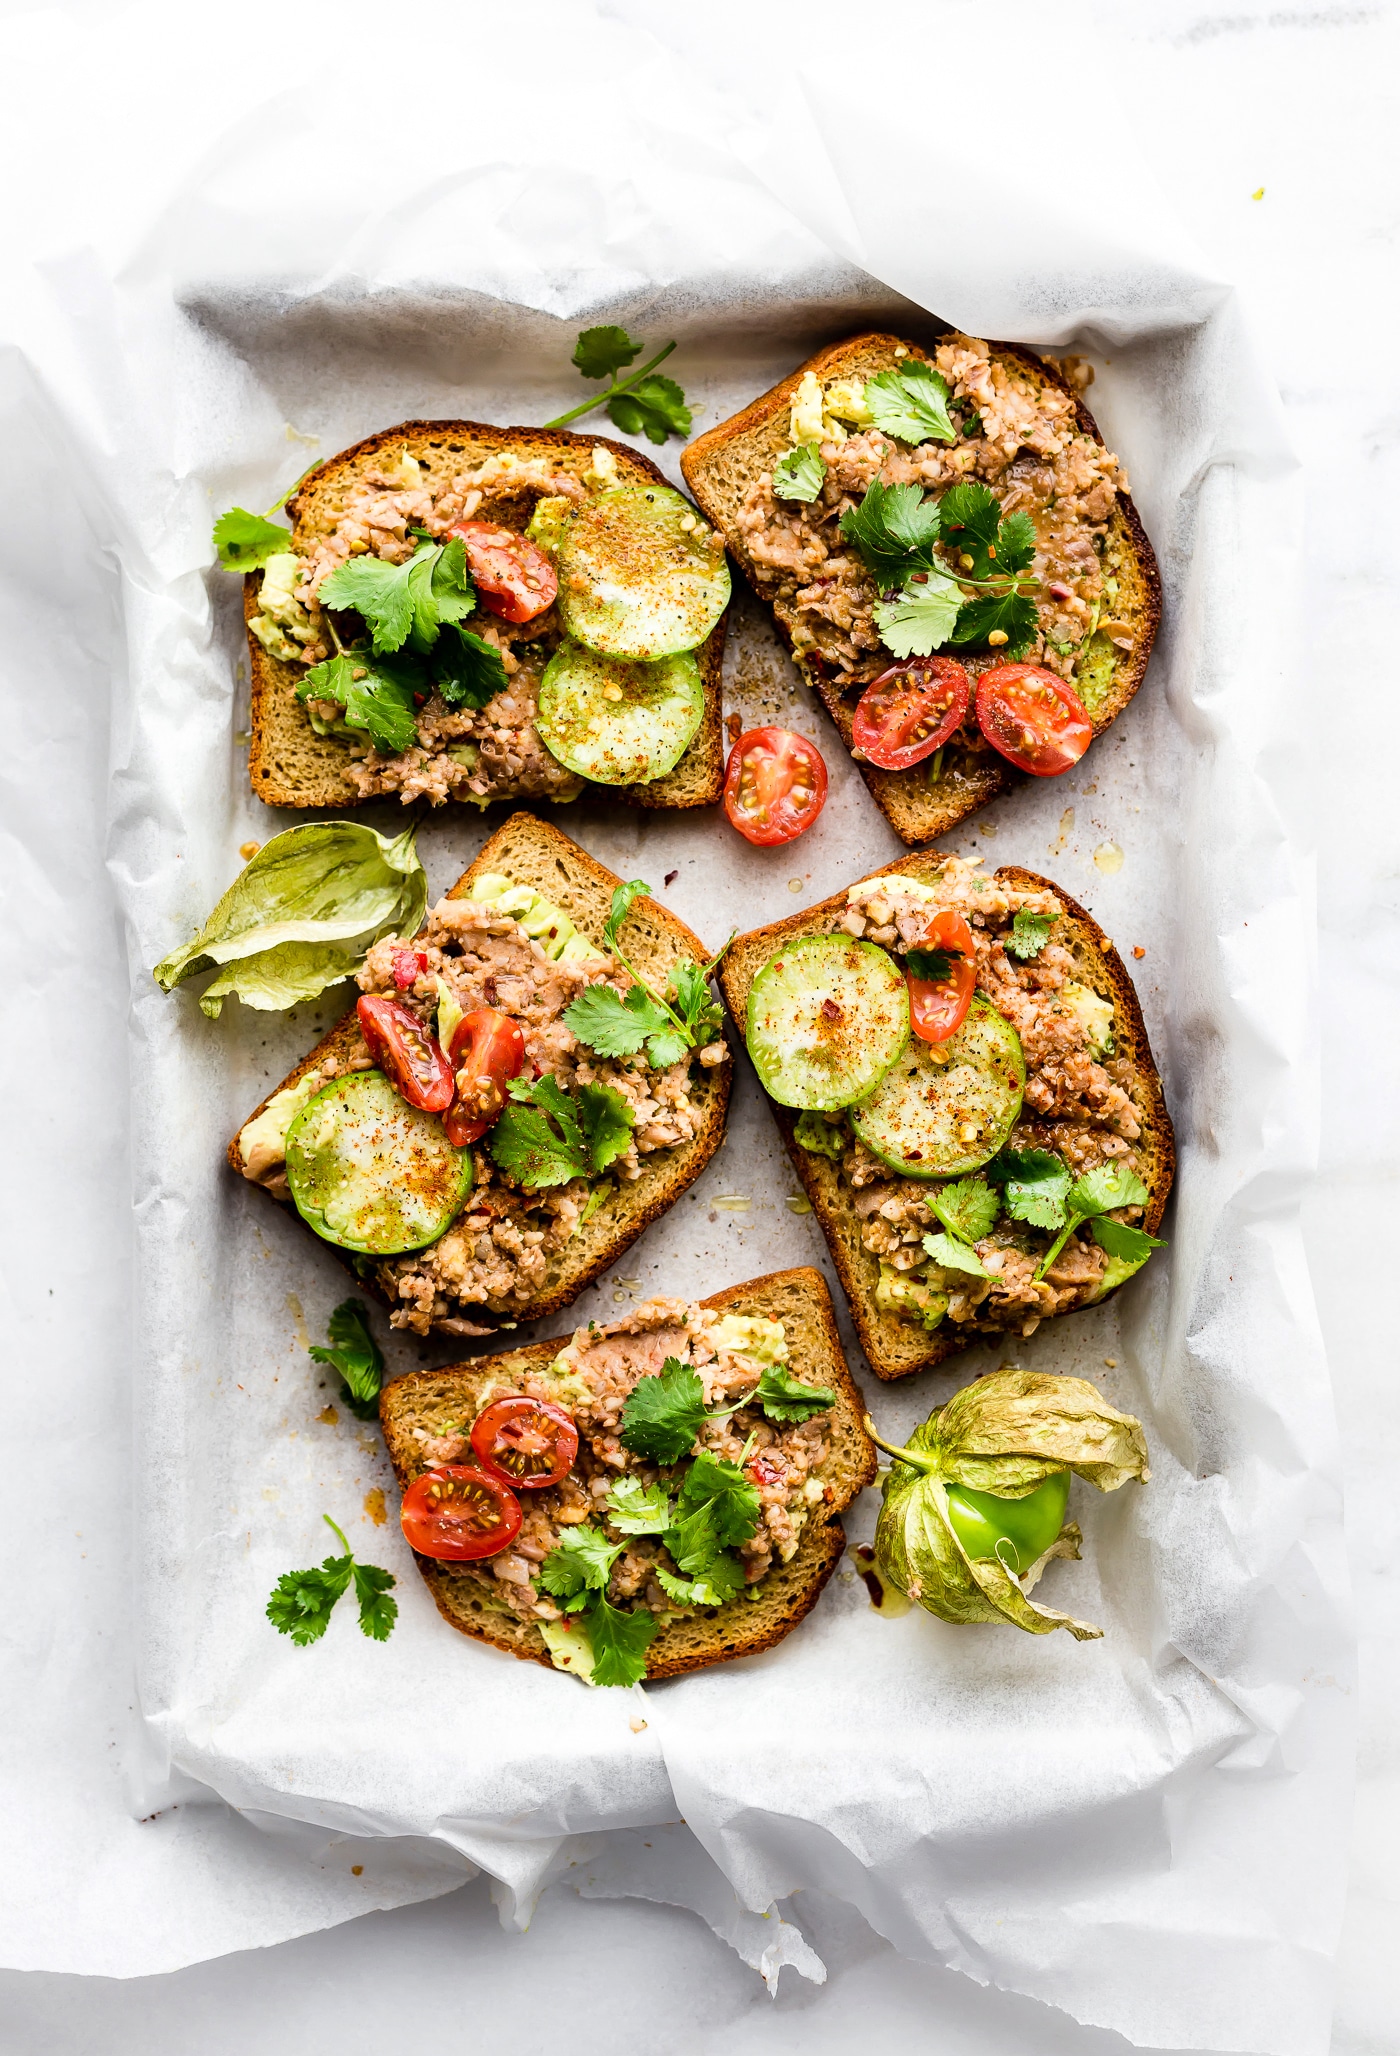 Smashed Mexican Beans Avocado Toast! Avocado Toast Recipes need a little upgrade. This Fully Loaded MEXICAN style avocado toast recipe is Gluten Free, Vegan Friendly loaded with Flavor!! A simple, yet spicy, meatless meal, breakfast, or even a healthy appetizer.